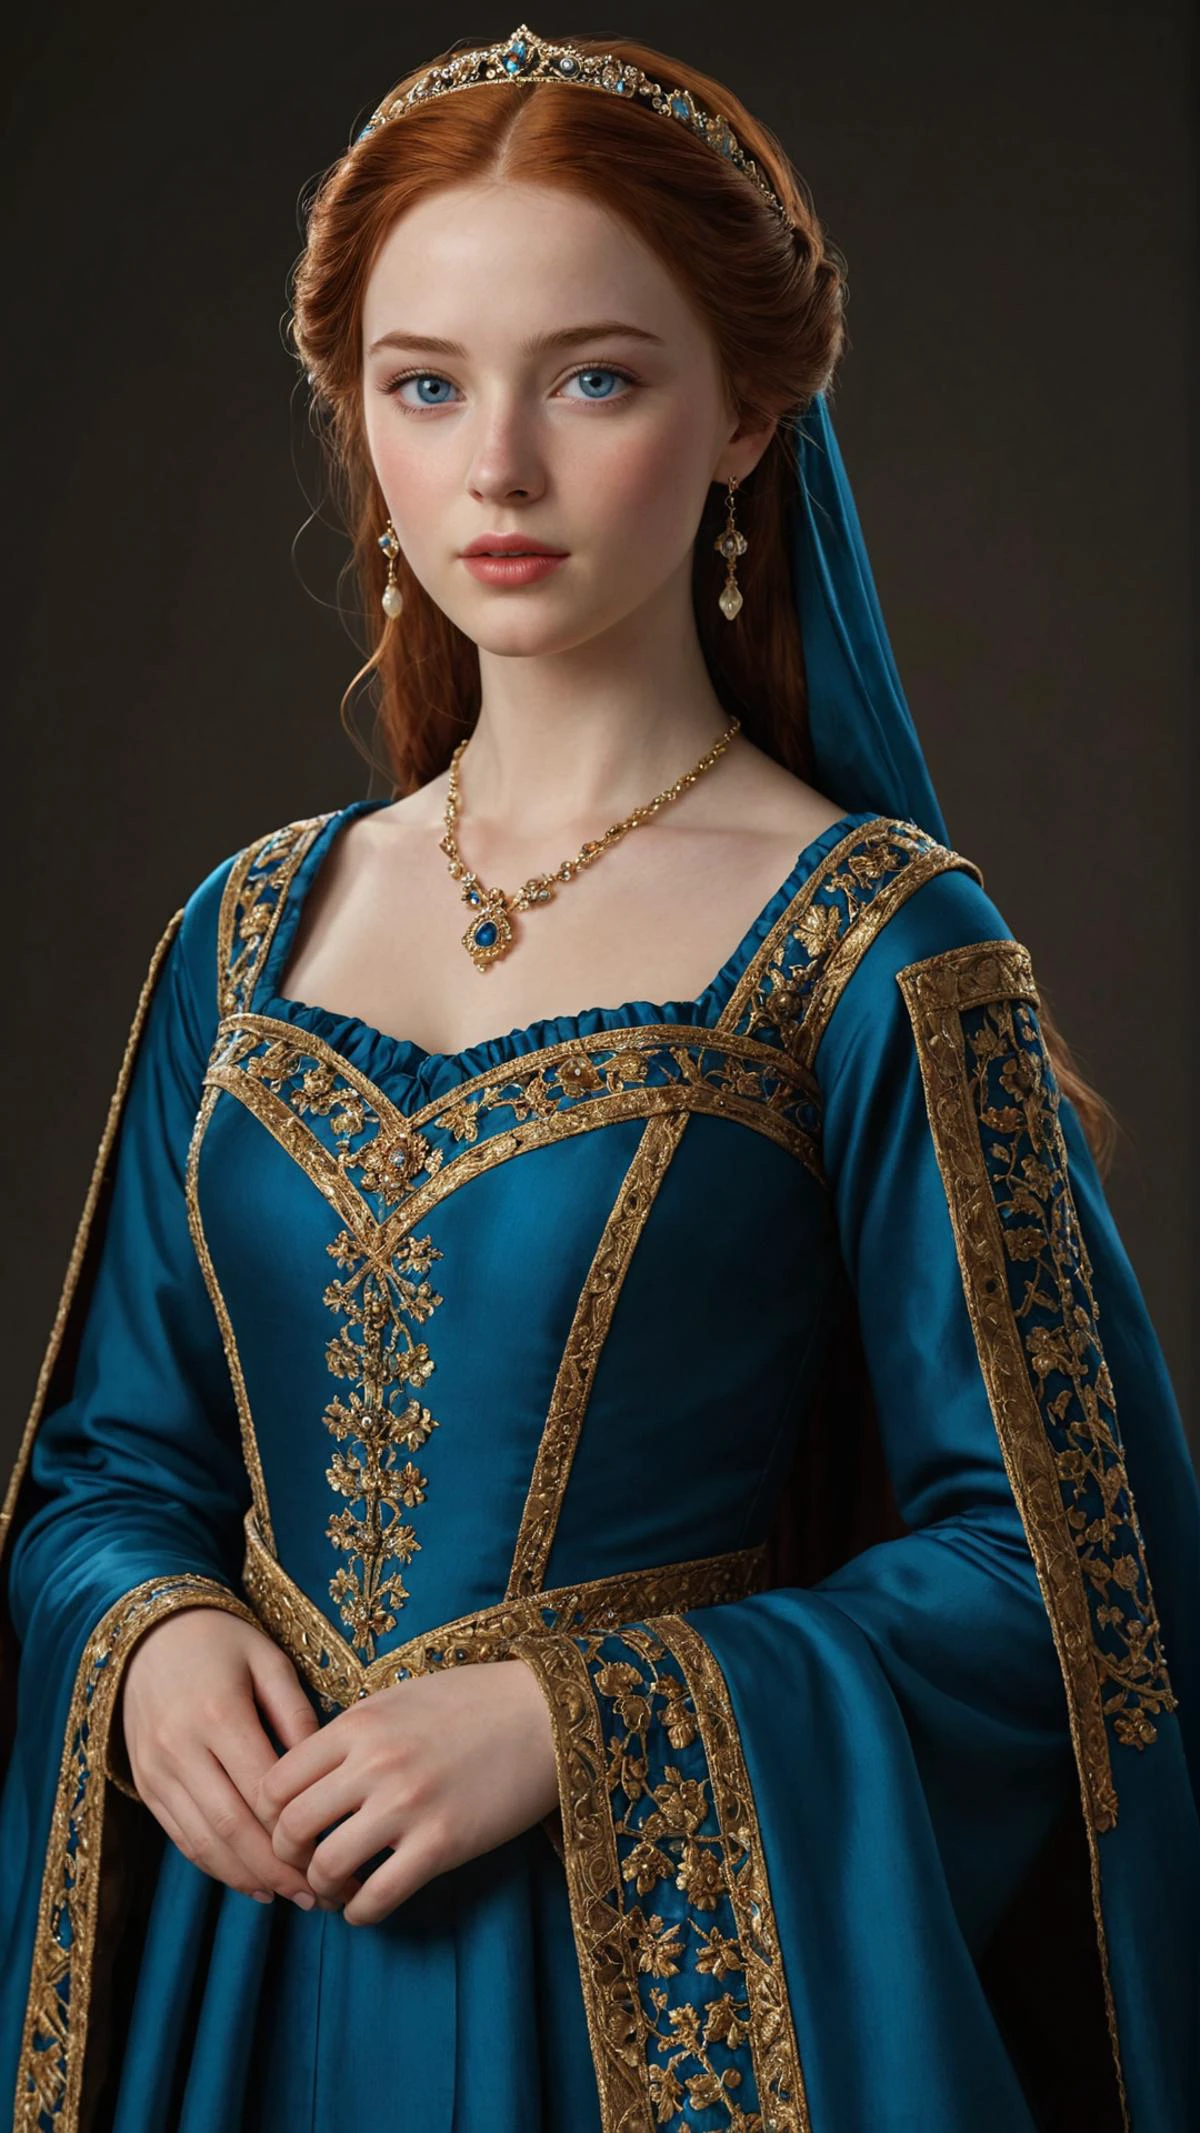 full body,A hyper-realistic digital illustration of a young woman,18 years old,with an enhanced sense of realism. She has pale skin,bright blue eyes,full lips,and high cheekbones,with full auburn hair styled in an early medieval fashion. Her dress is a luxurious early medieval garment made of blue silk and richly decorated with precious brocade,captured in exquisite detail to emphasize texture and fabric realism. The image aims to reflect her noble and regal demeanor with a more life-like appearance,maintaining a 9:16 aspect ratio to highlight her stature,